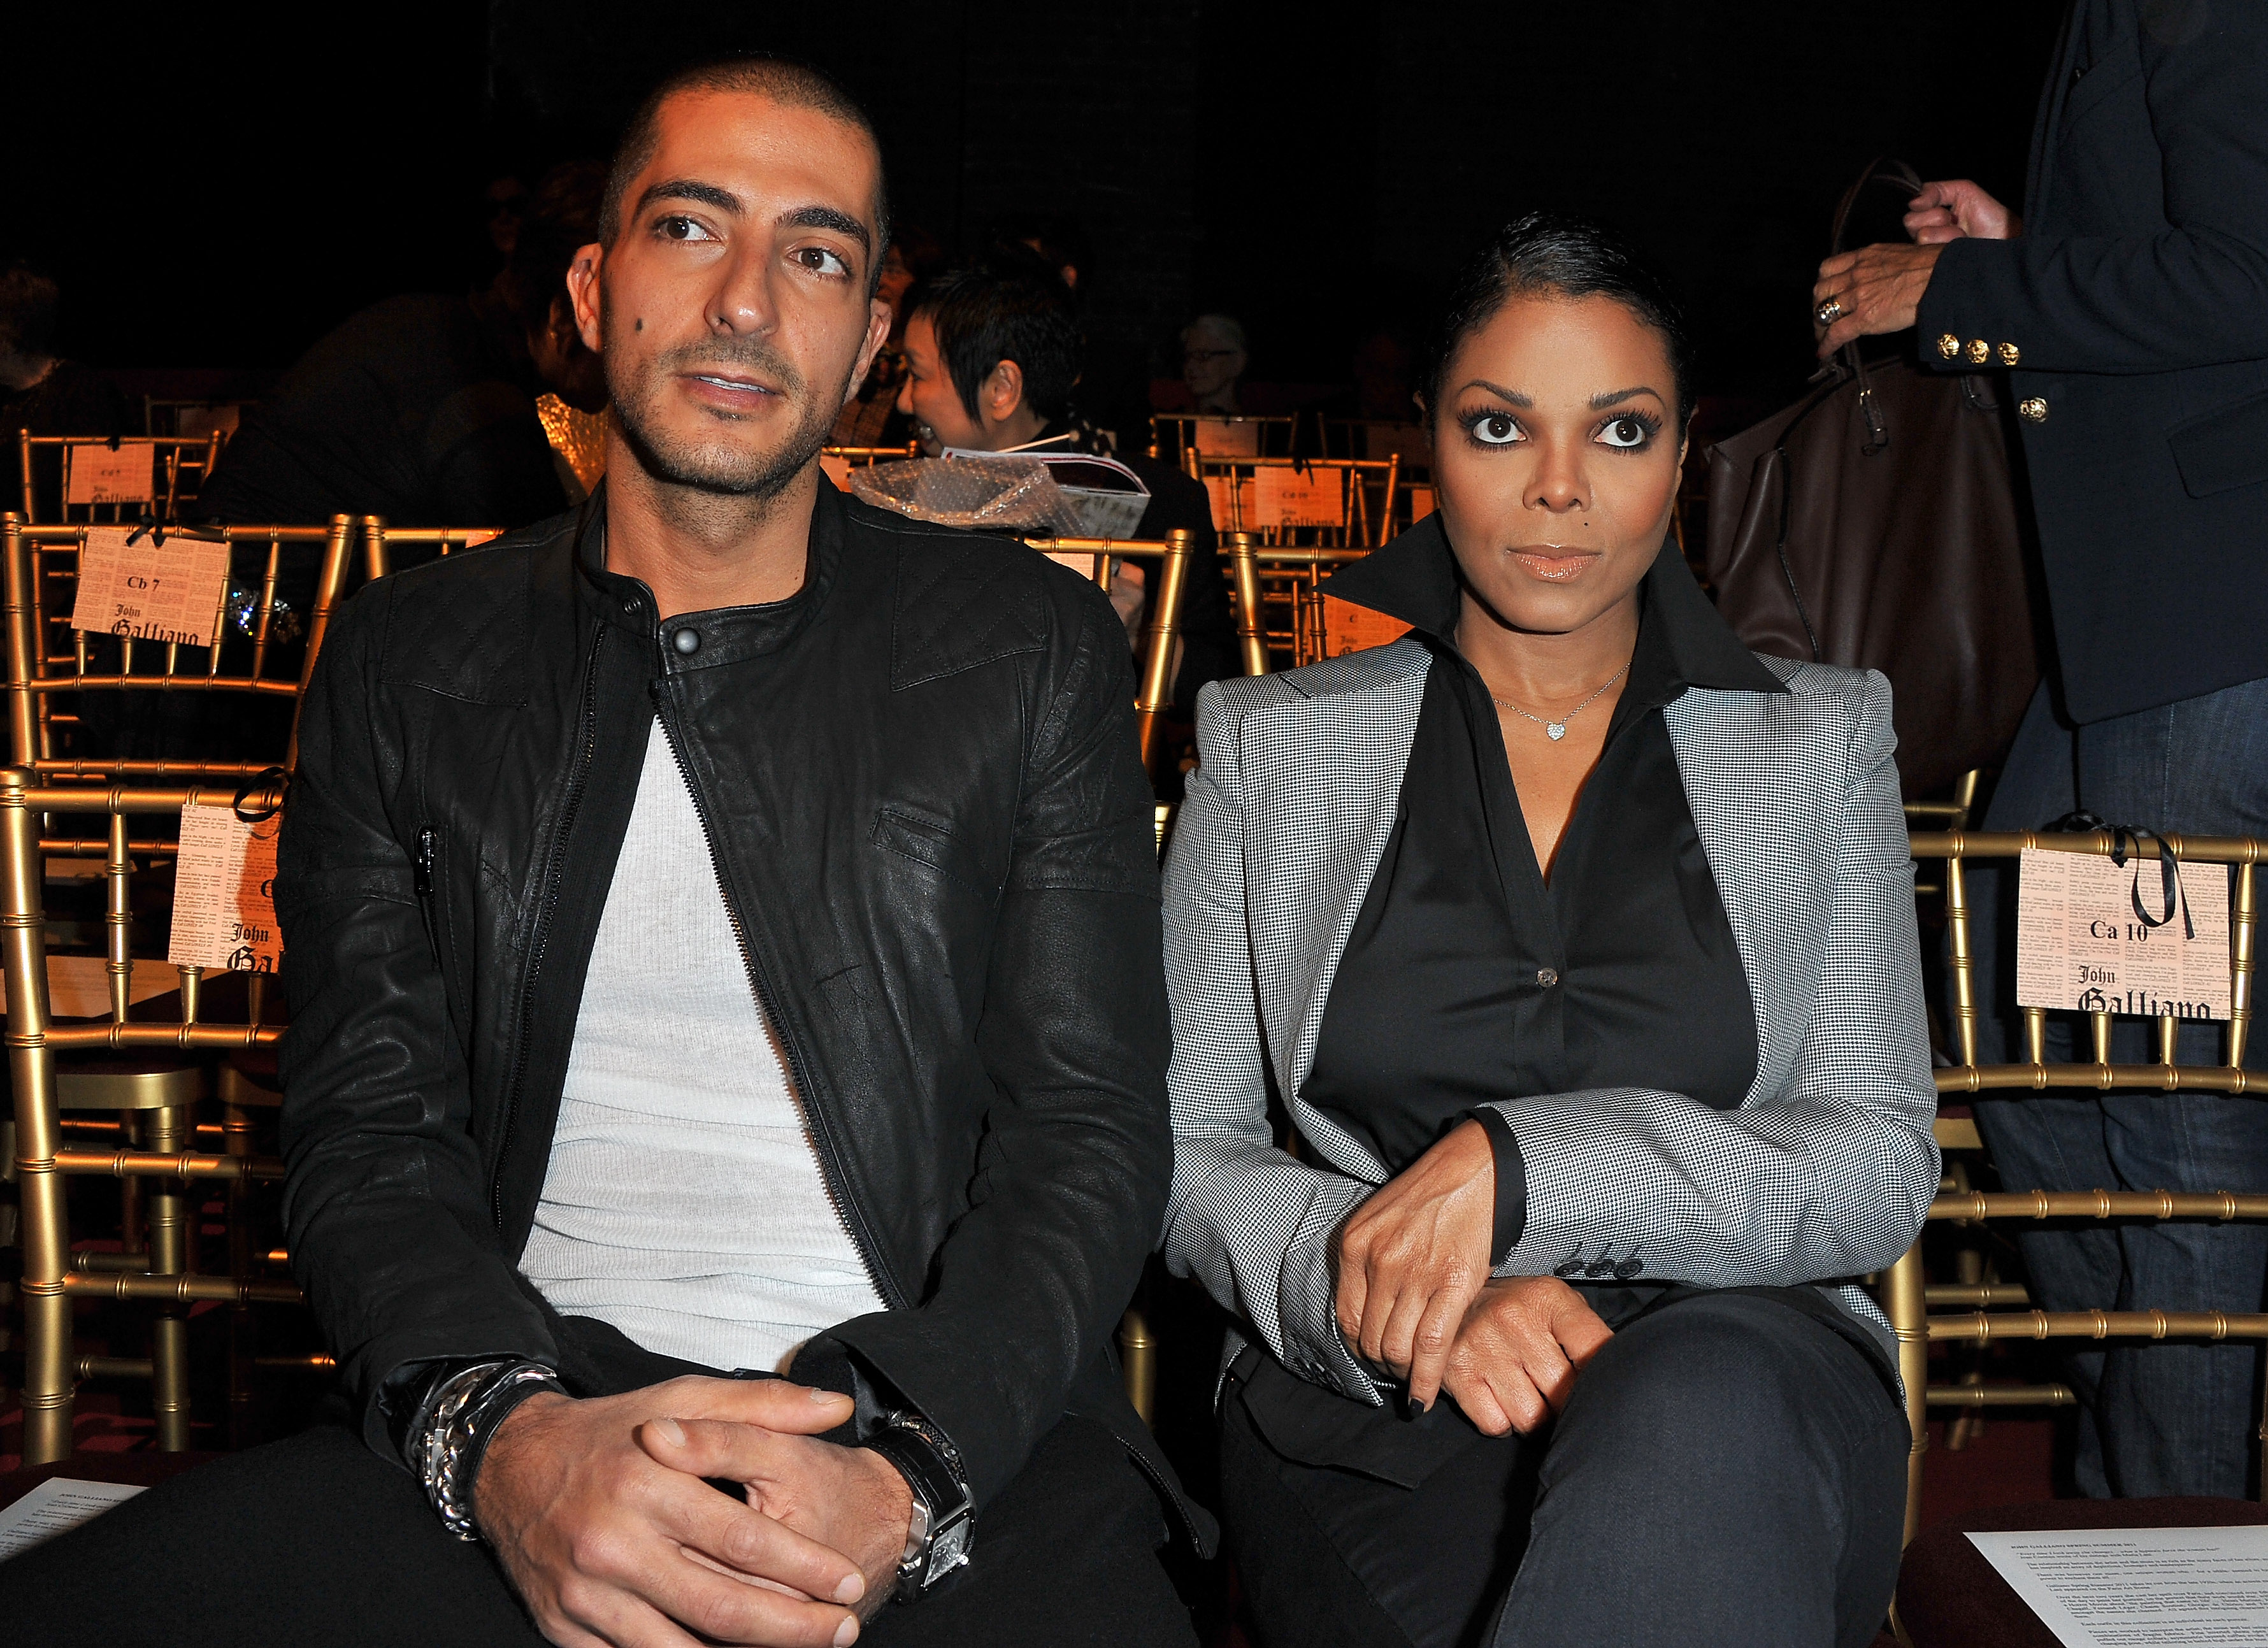 Wissam Al Mana and Janet Jackson attend the John Galliano Ready to Wear Spring/Summer 2011 show in Paris, France, on October 3, 2010. | Source: Getty Images